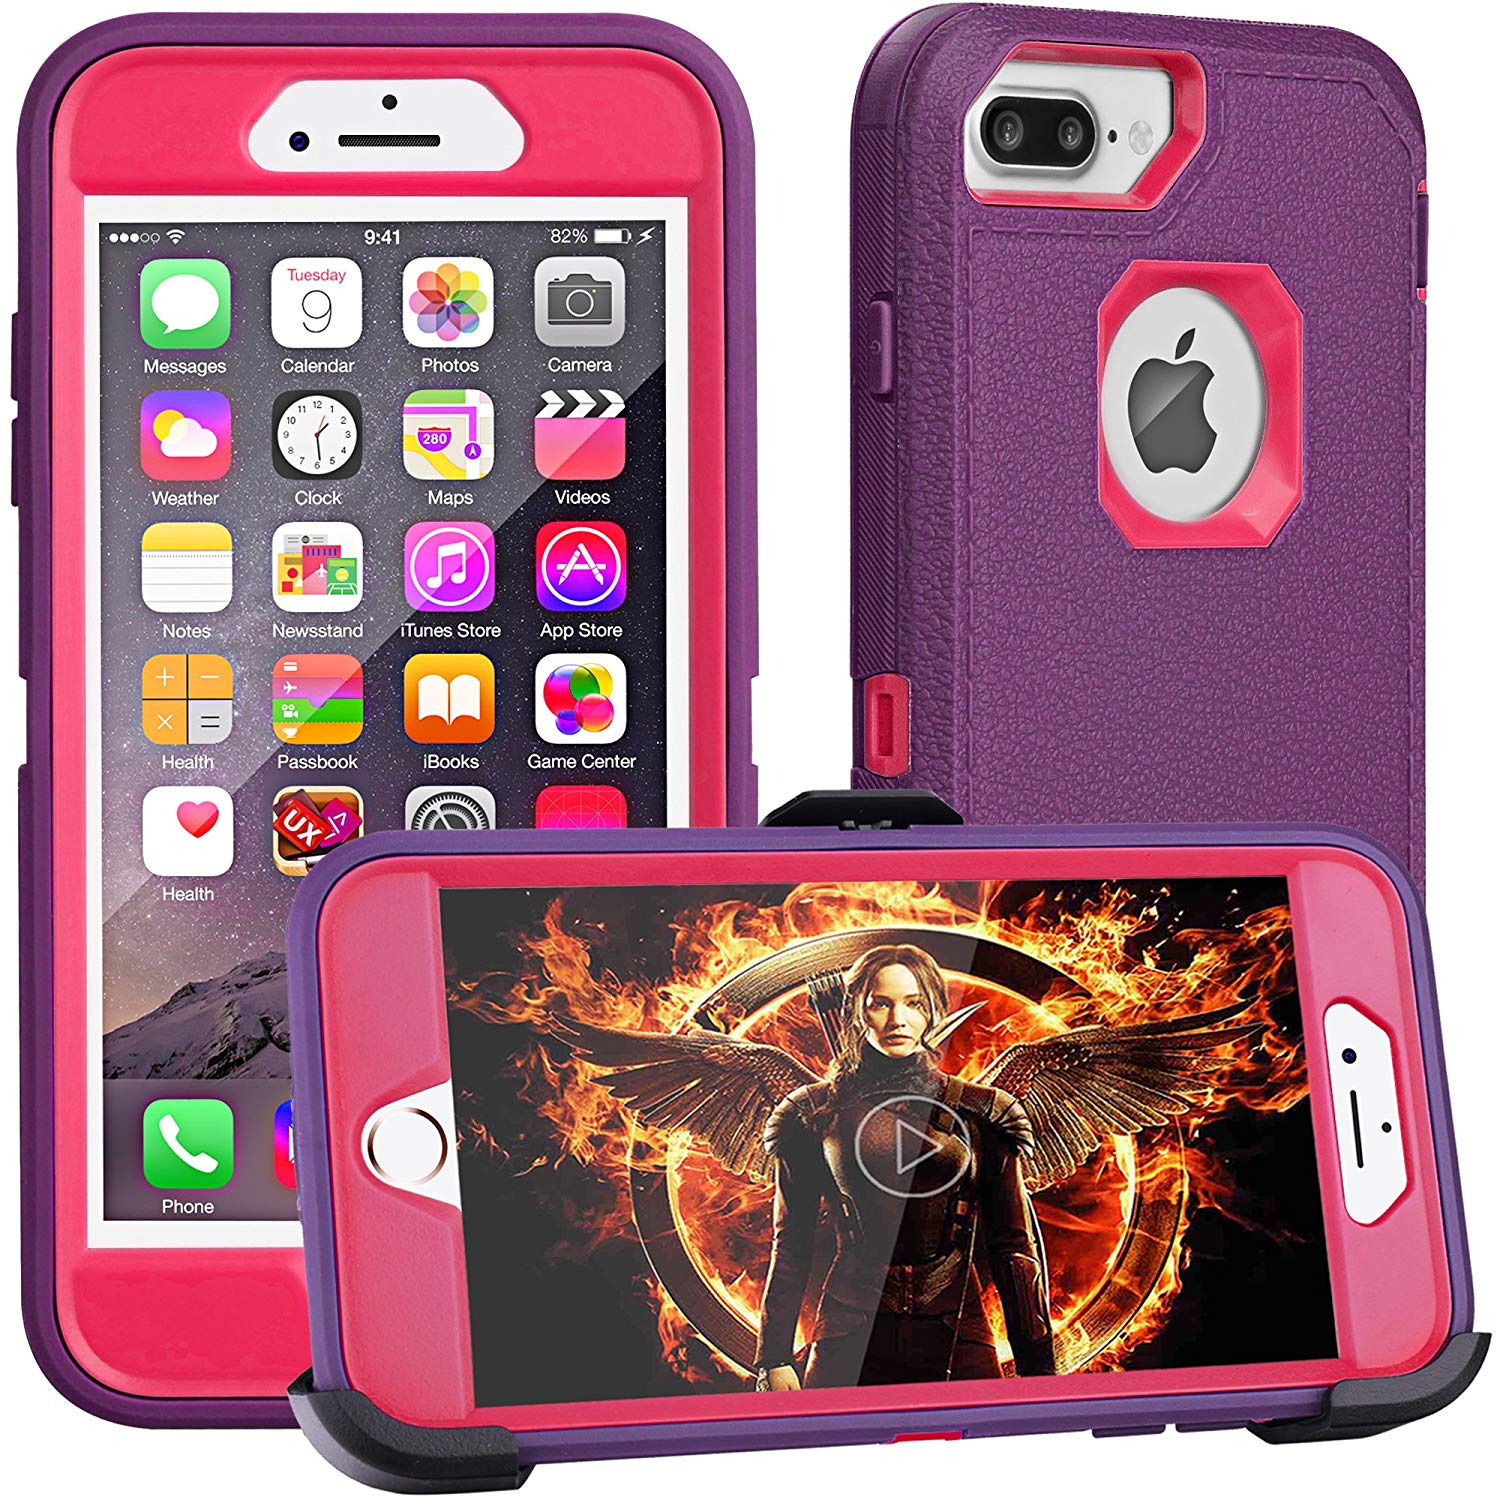 iPhone 8 Plus Case,iPhone 7 Plus Case,iPhone 6 Plus Case,FOGEEK[Dust-Proof]Belt-Clip Heavy Duty Kickstand Cover[Shockproof] PC+TPU for Apple iPhone 7 Plus,iPhone 6/6s Plus(Purple and Rose) …